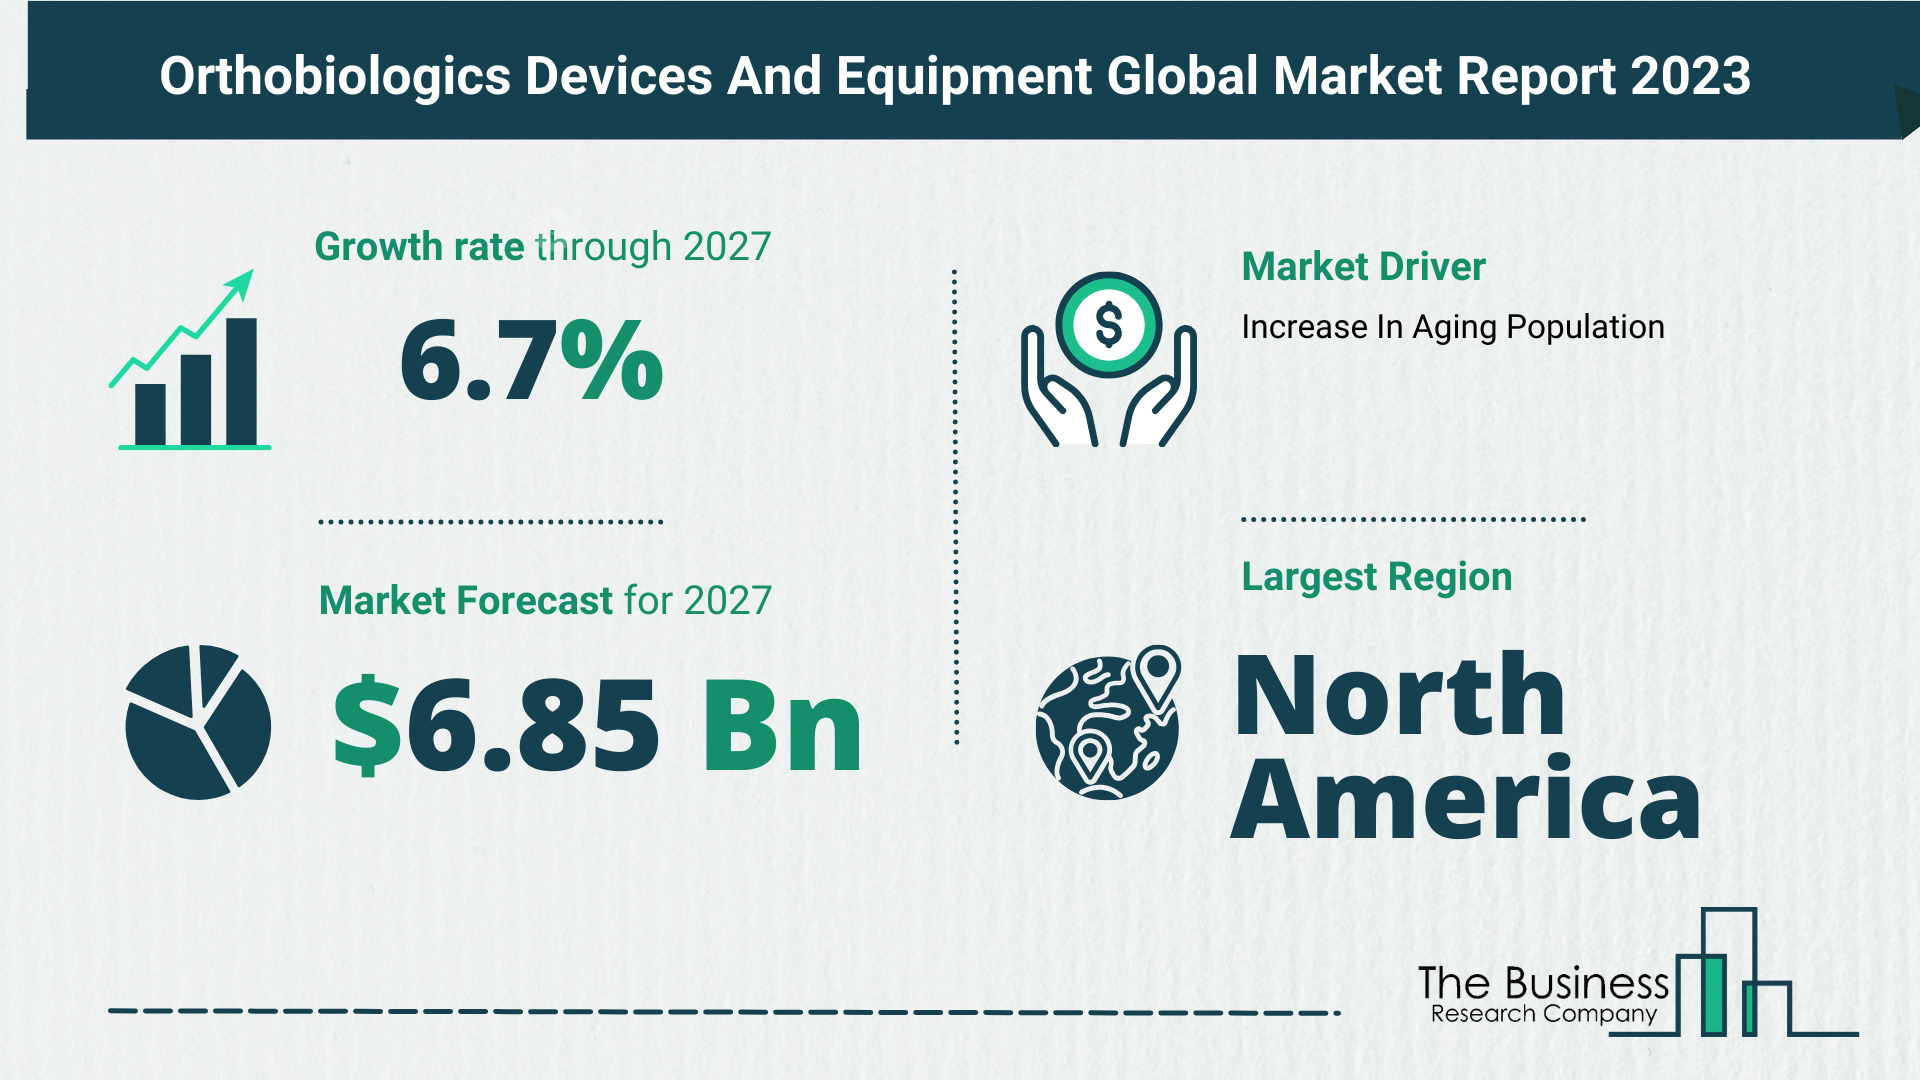 Understand How The Orthobiologics Devices And Equipment Market Is Poised To Grow Through 2023-2032